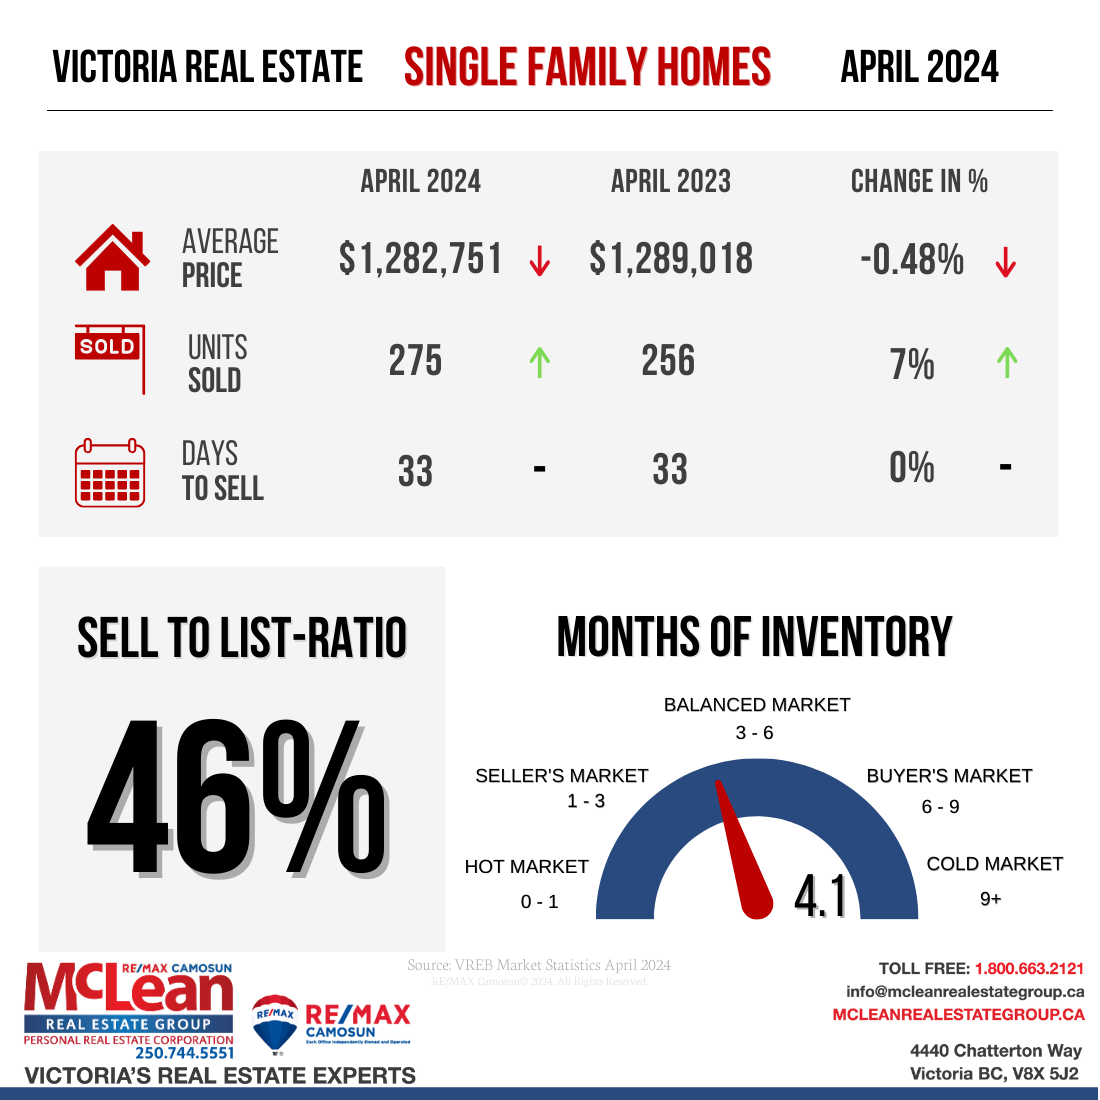 April 2024 single family home realty stats